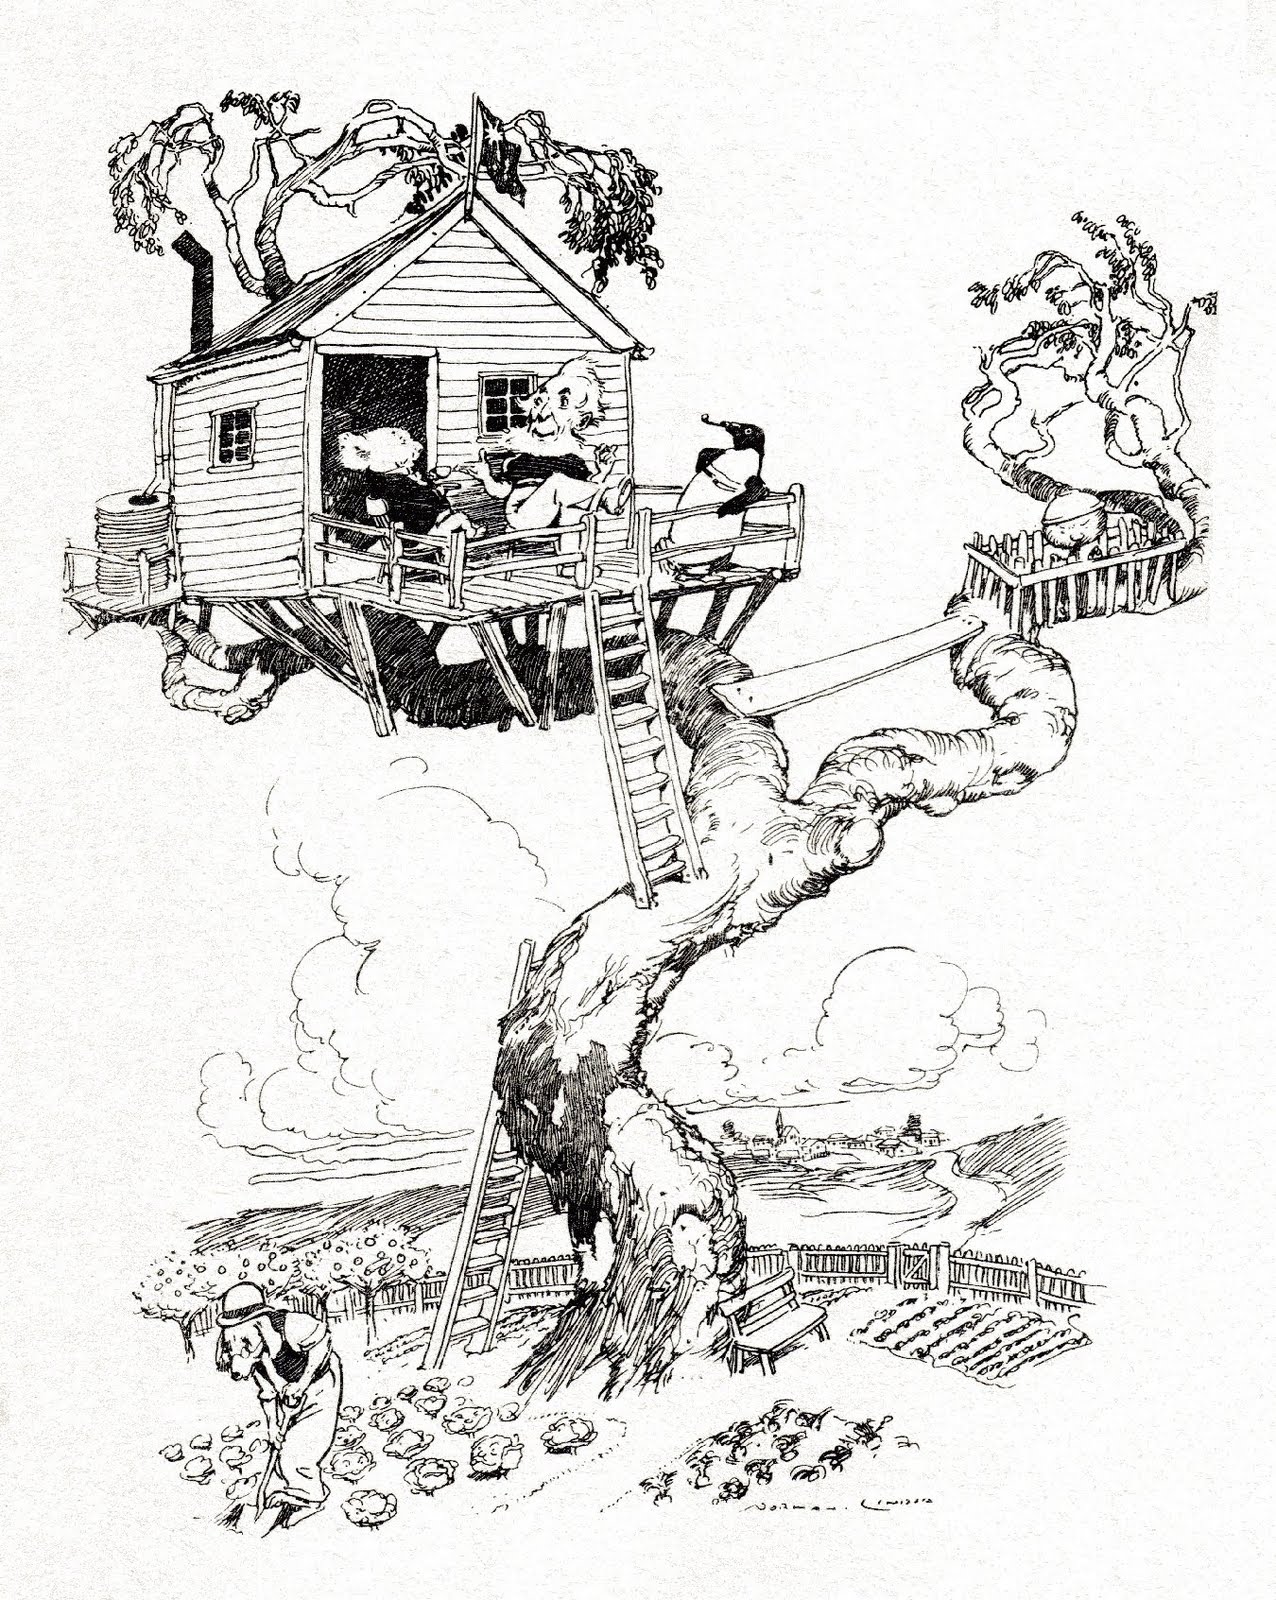 anthropomorphic animals in tree-house (sketch)